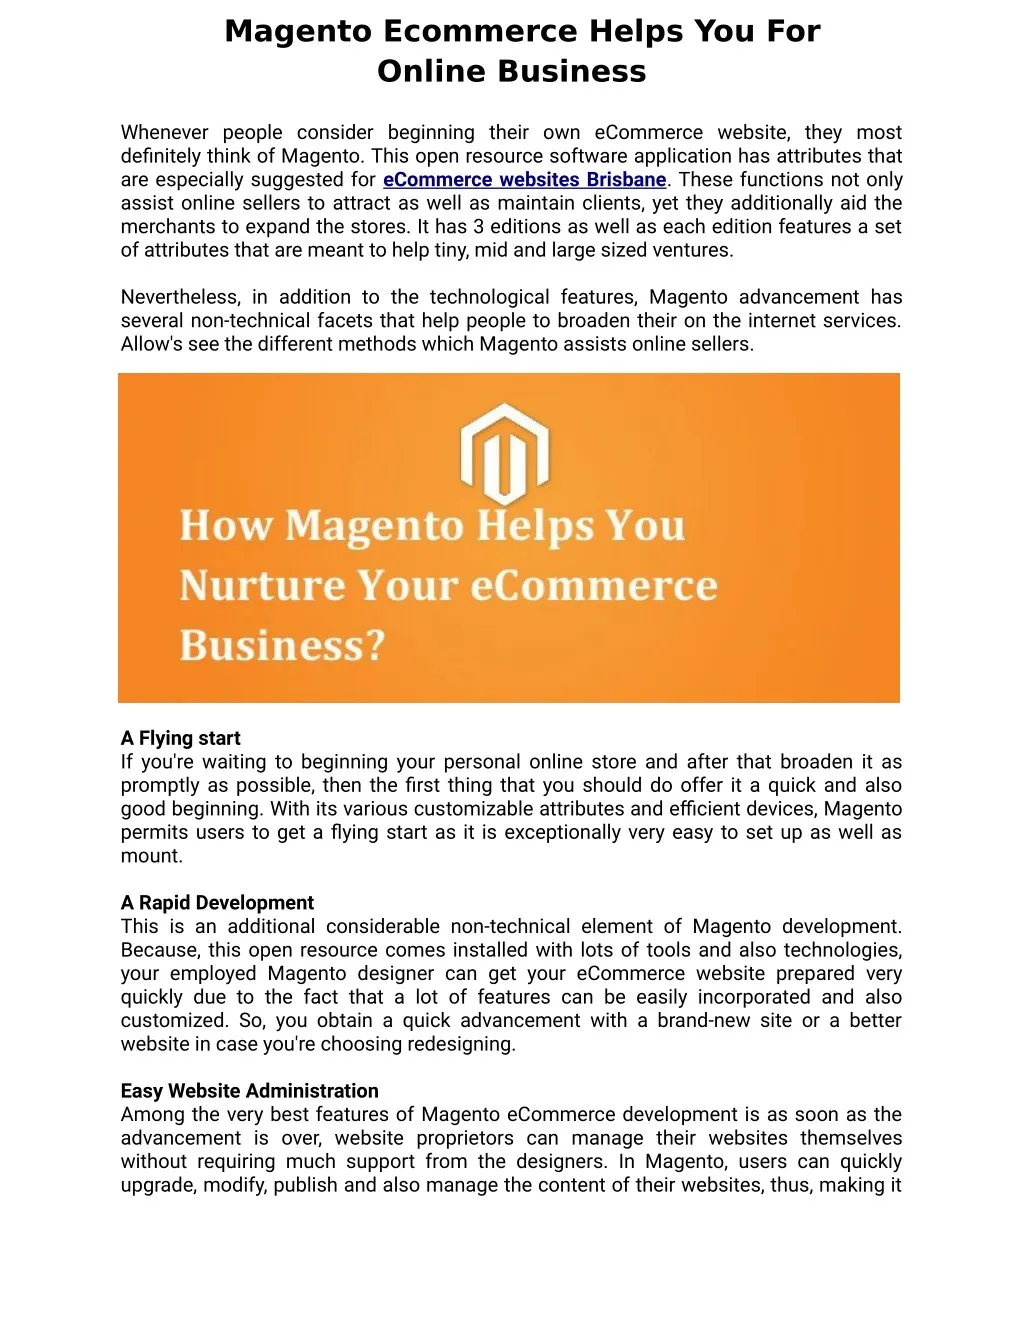 magento ecommerce helps you for online business